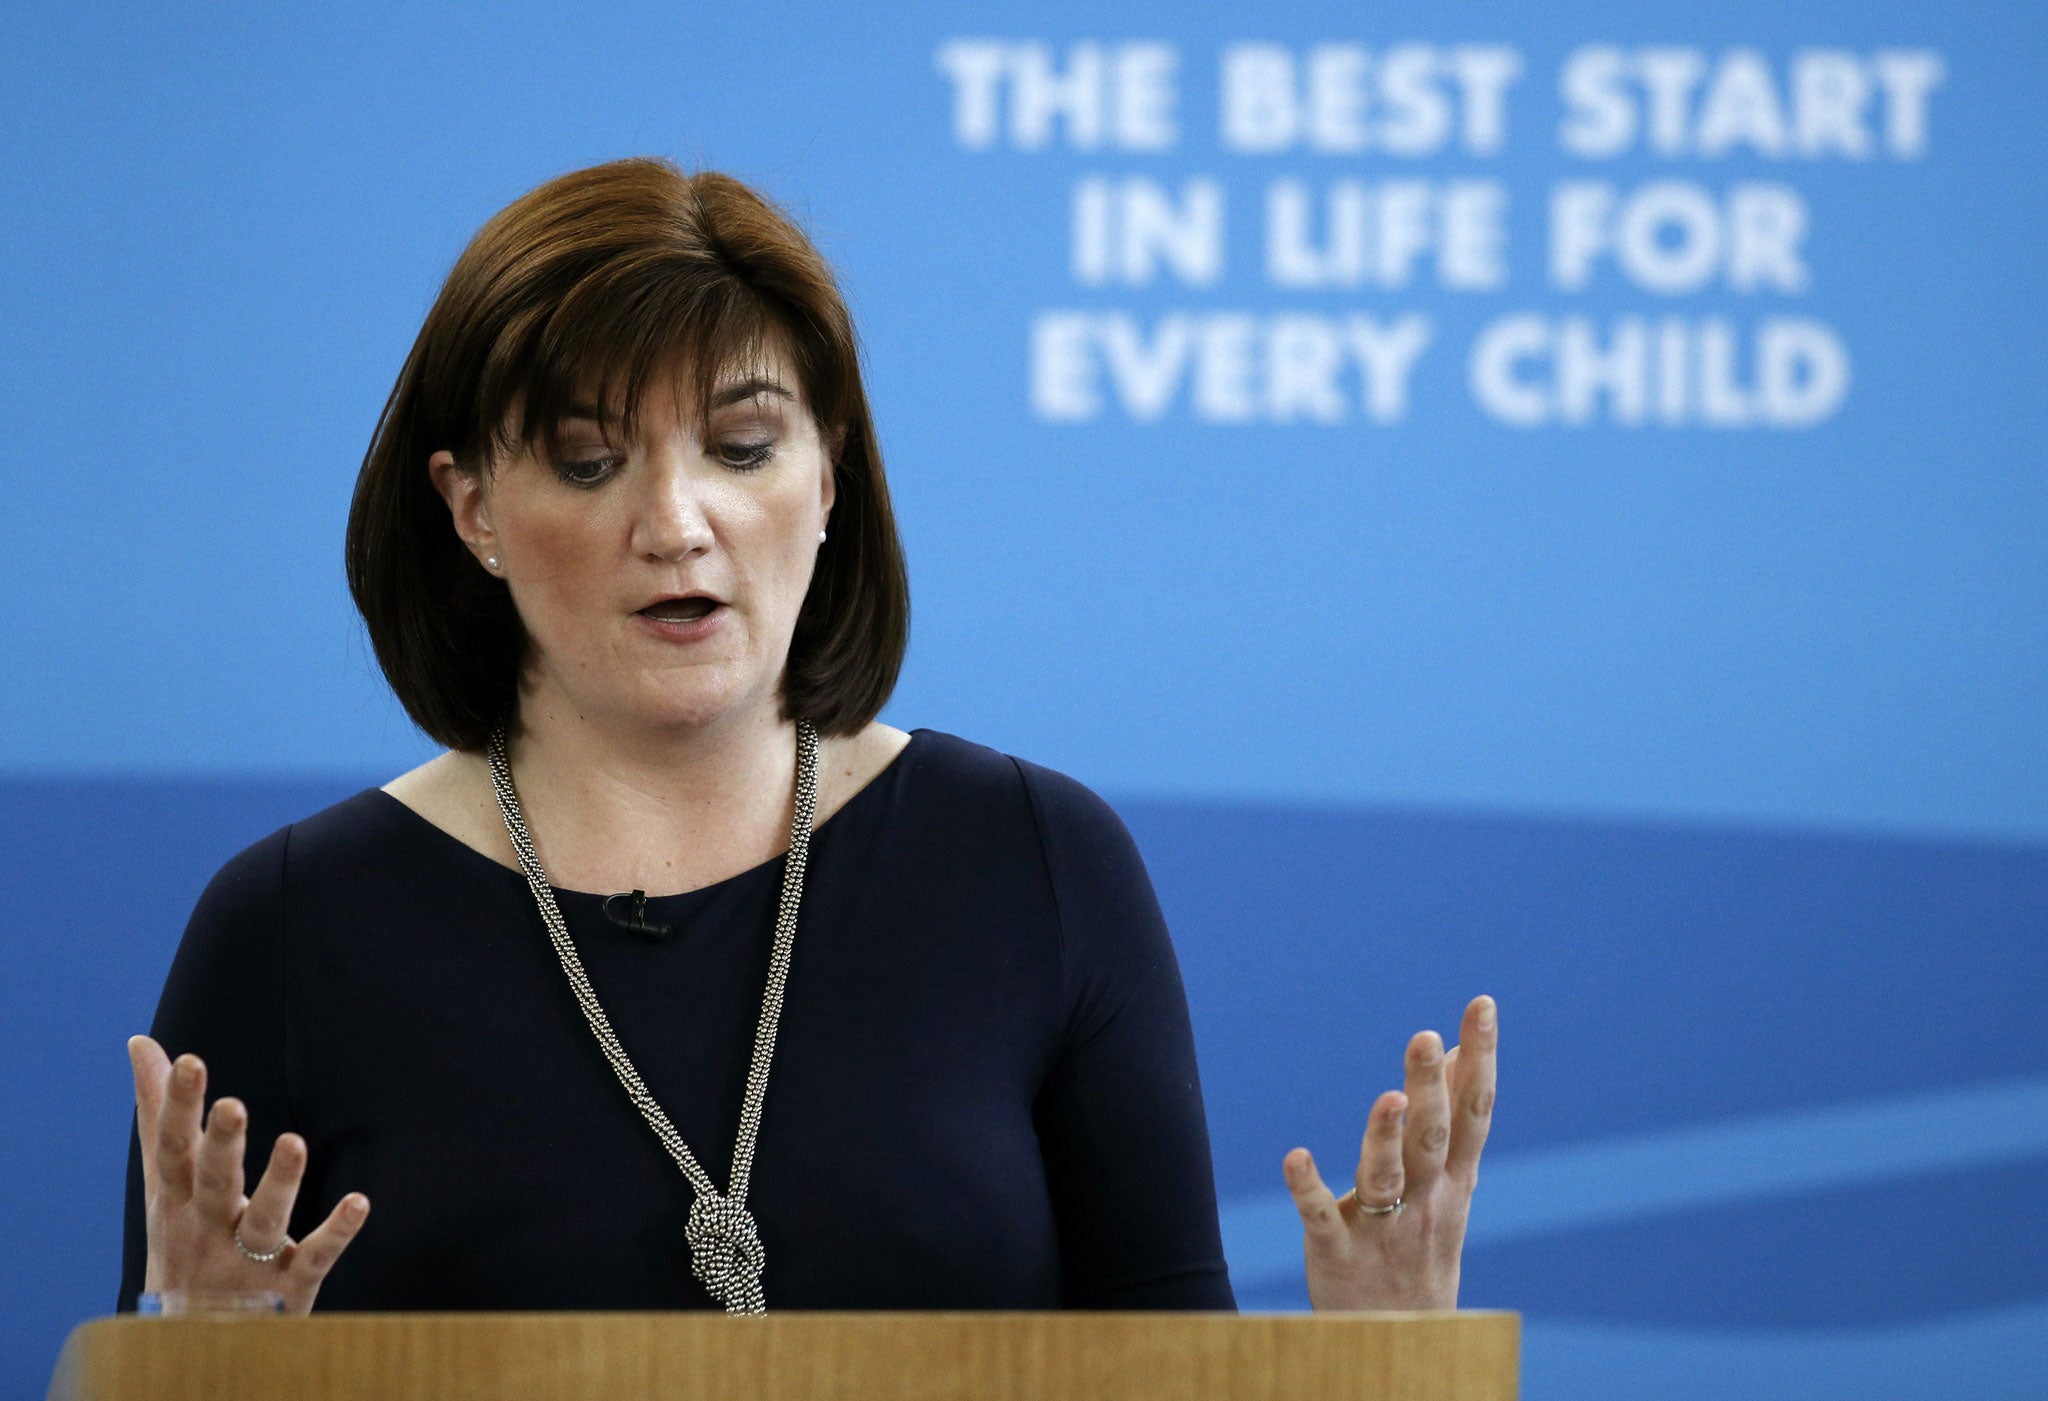 Bousted believes that Nicky Morgan missed a trick when she asked teachers to email her about their workloads (Getty)